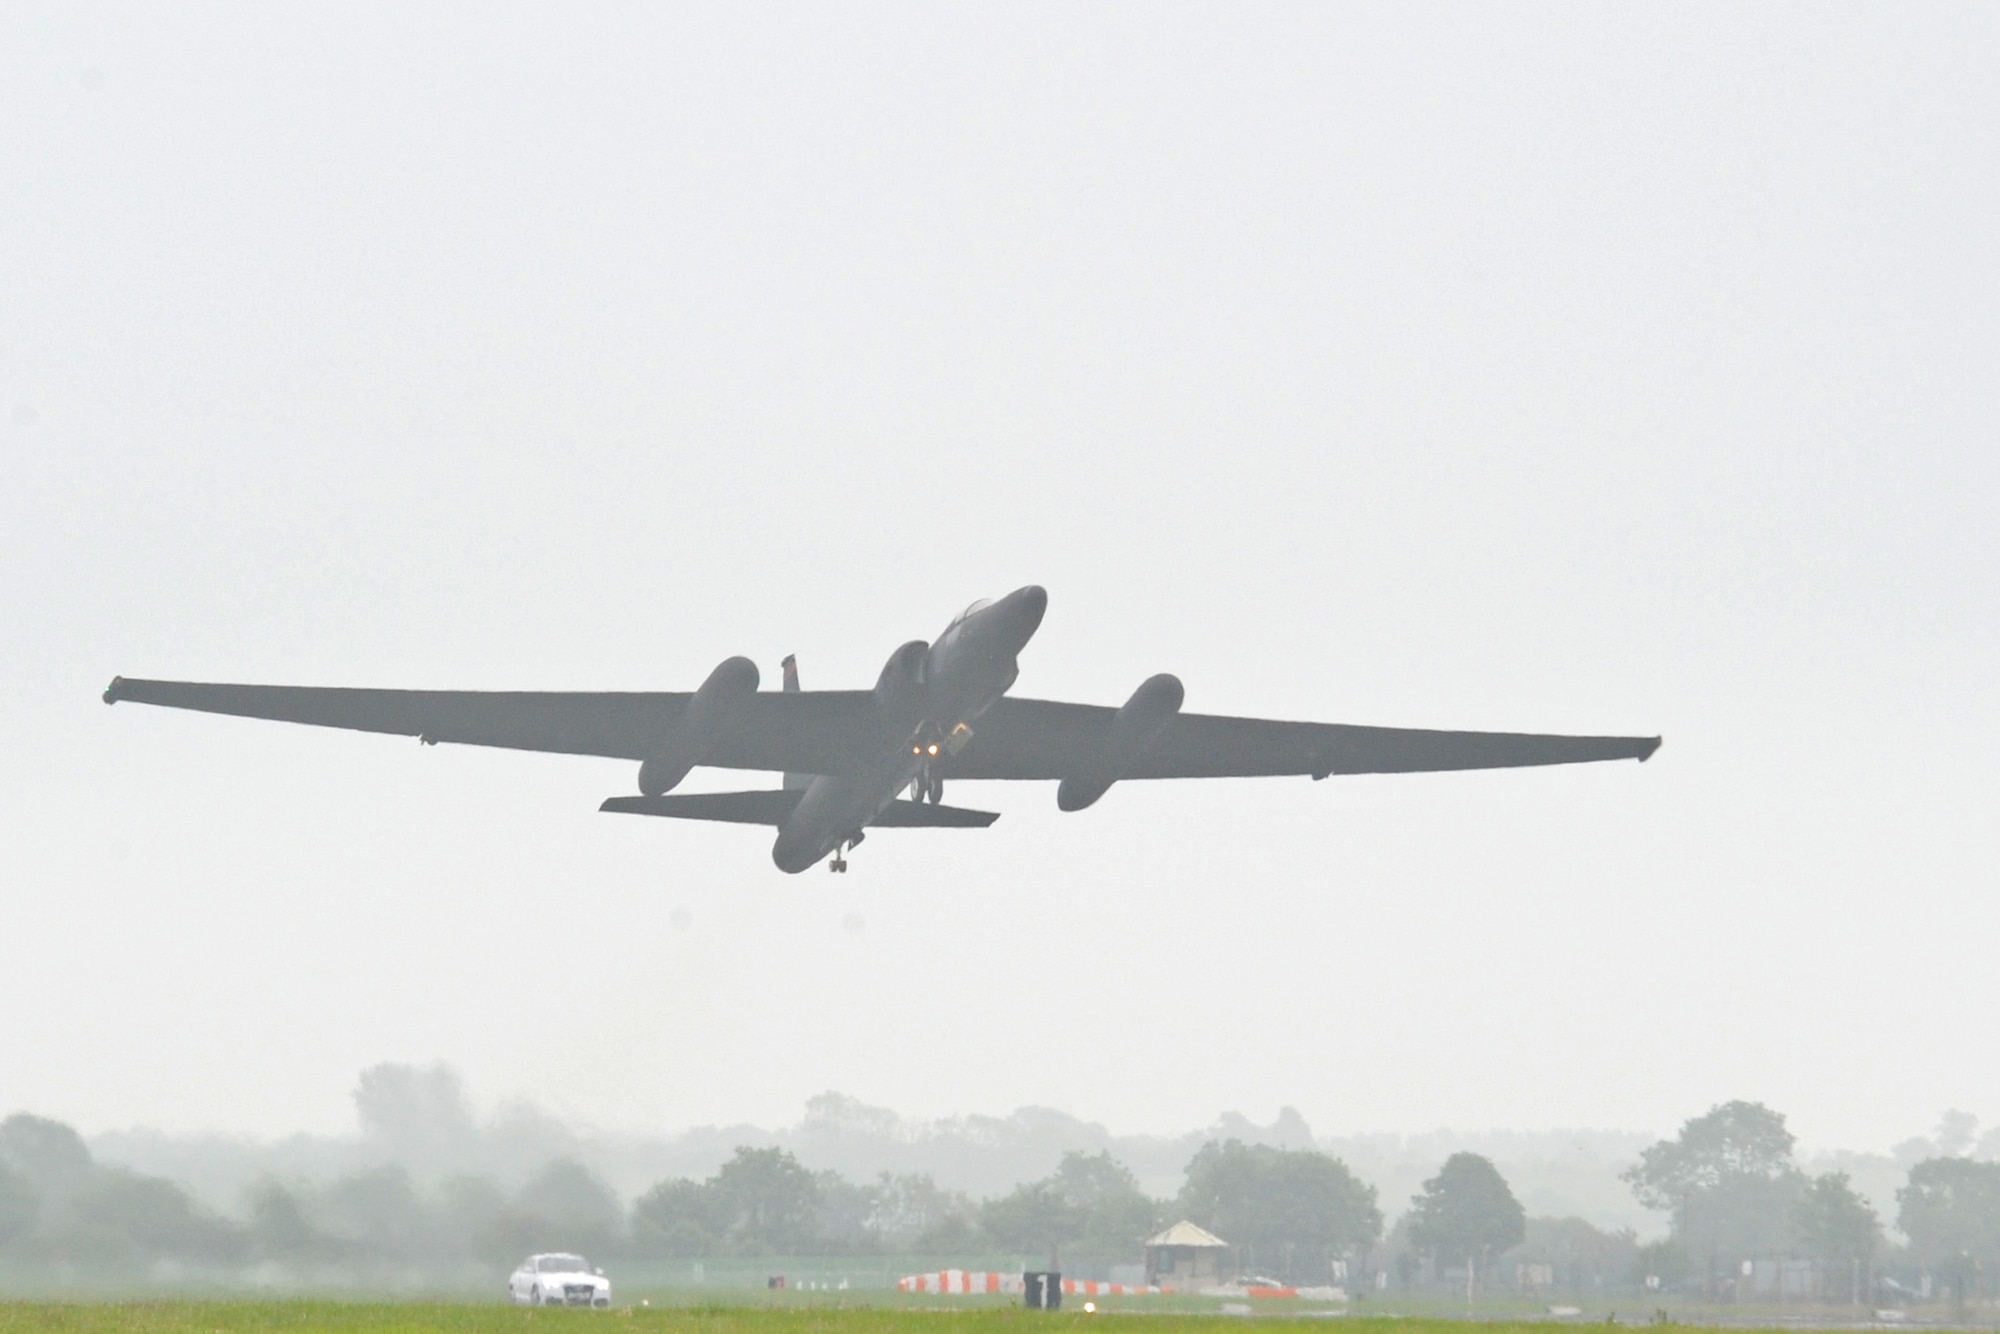 A U-2 Dragon Lady takes off June 9, 2016, at Royal Air Force Fairford, Gloucestershire, England. The jet was met by an en route recovery team (ERT) in England to transition aircraft from and to Beale Air Force Base, California, and forward operating locations (FOL). The ERT is used like a pit crew at the midway point in Fairford, ensuring the aircraft are prepared to make it to their next destination. (U.S. Air Force photo by Senior Airman Ramon A. Adelan)